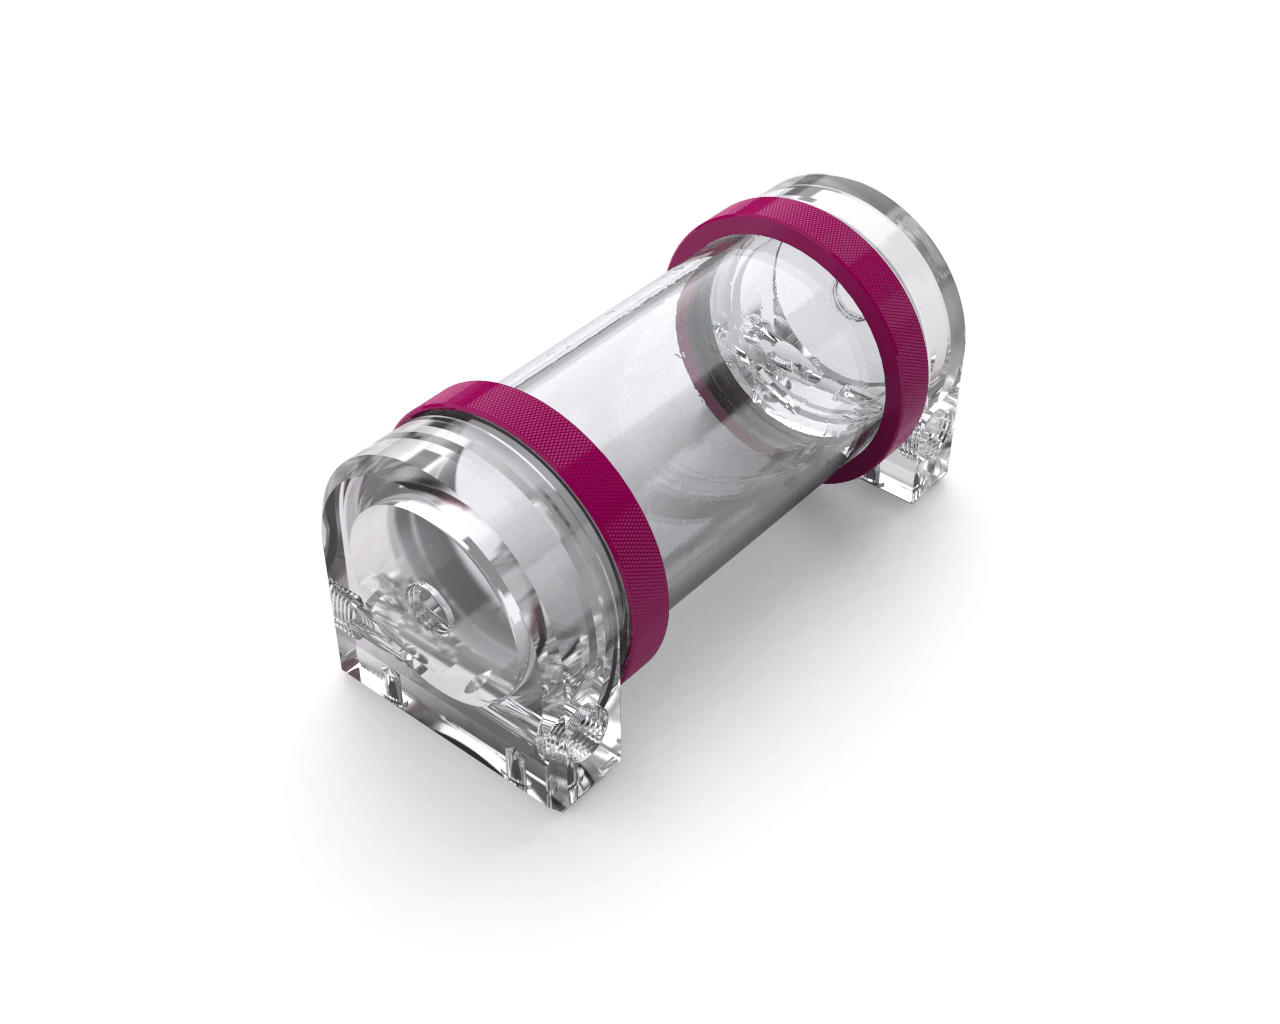 PrimoChill CTR Hard Mount Phase II Reservoir - Clear PMMA – 120mm - PrimoChill - KEEPING IT COOL Magenta